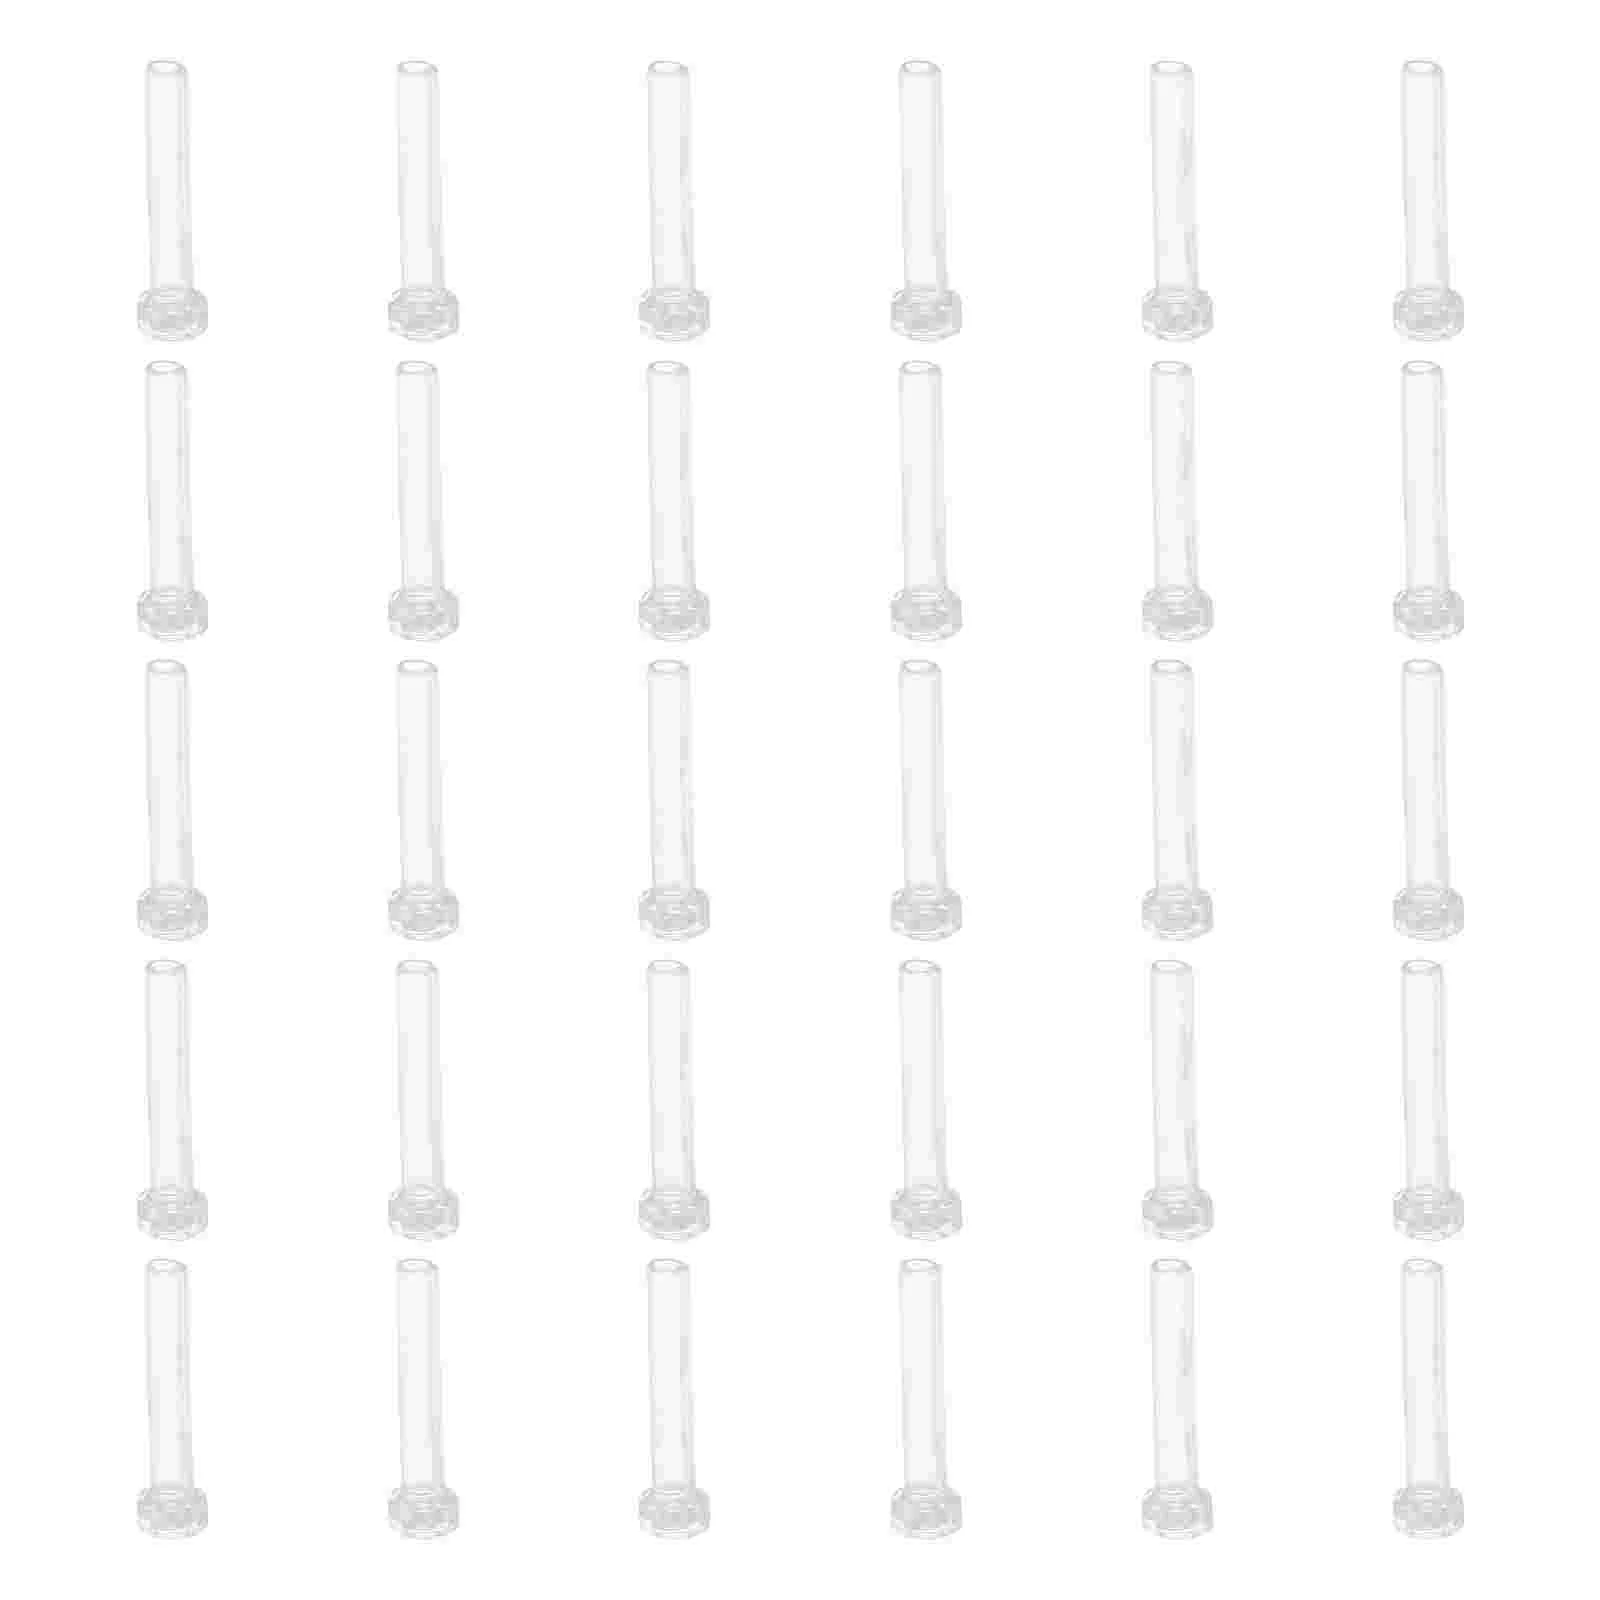 

30 Pcs Auricular Cannula Ear Jewelry Accessories Earrings Needle Cover Plastic Studs Female Clear Ornaments